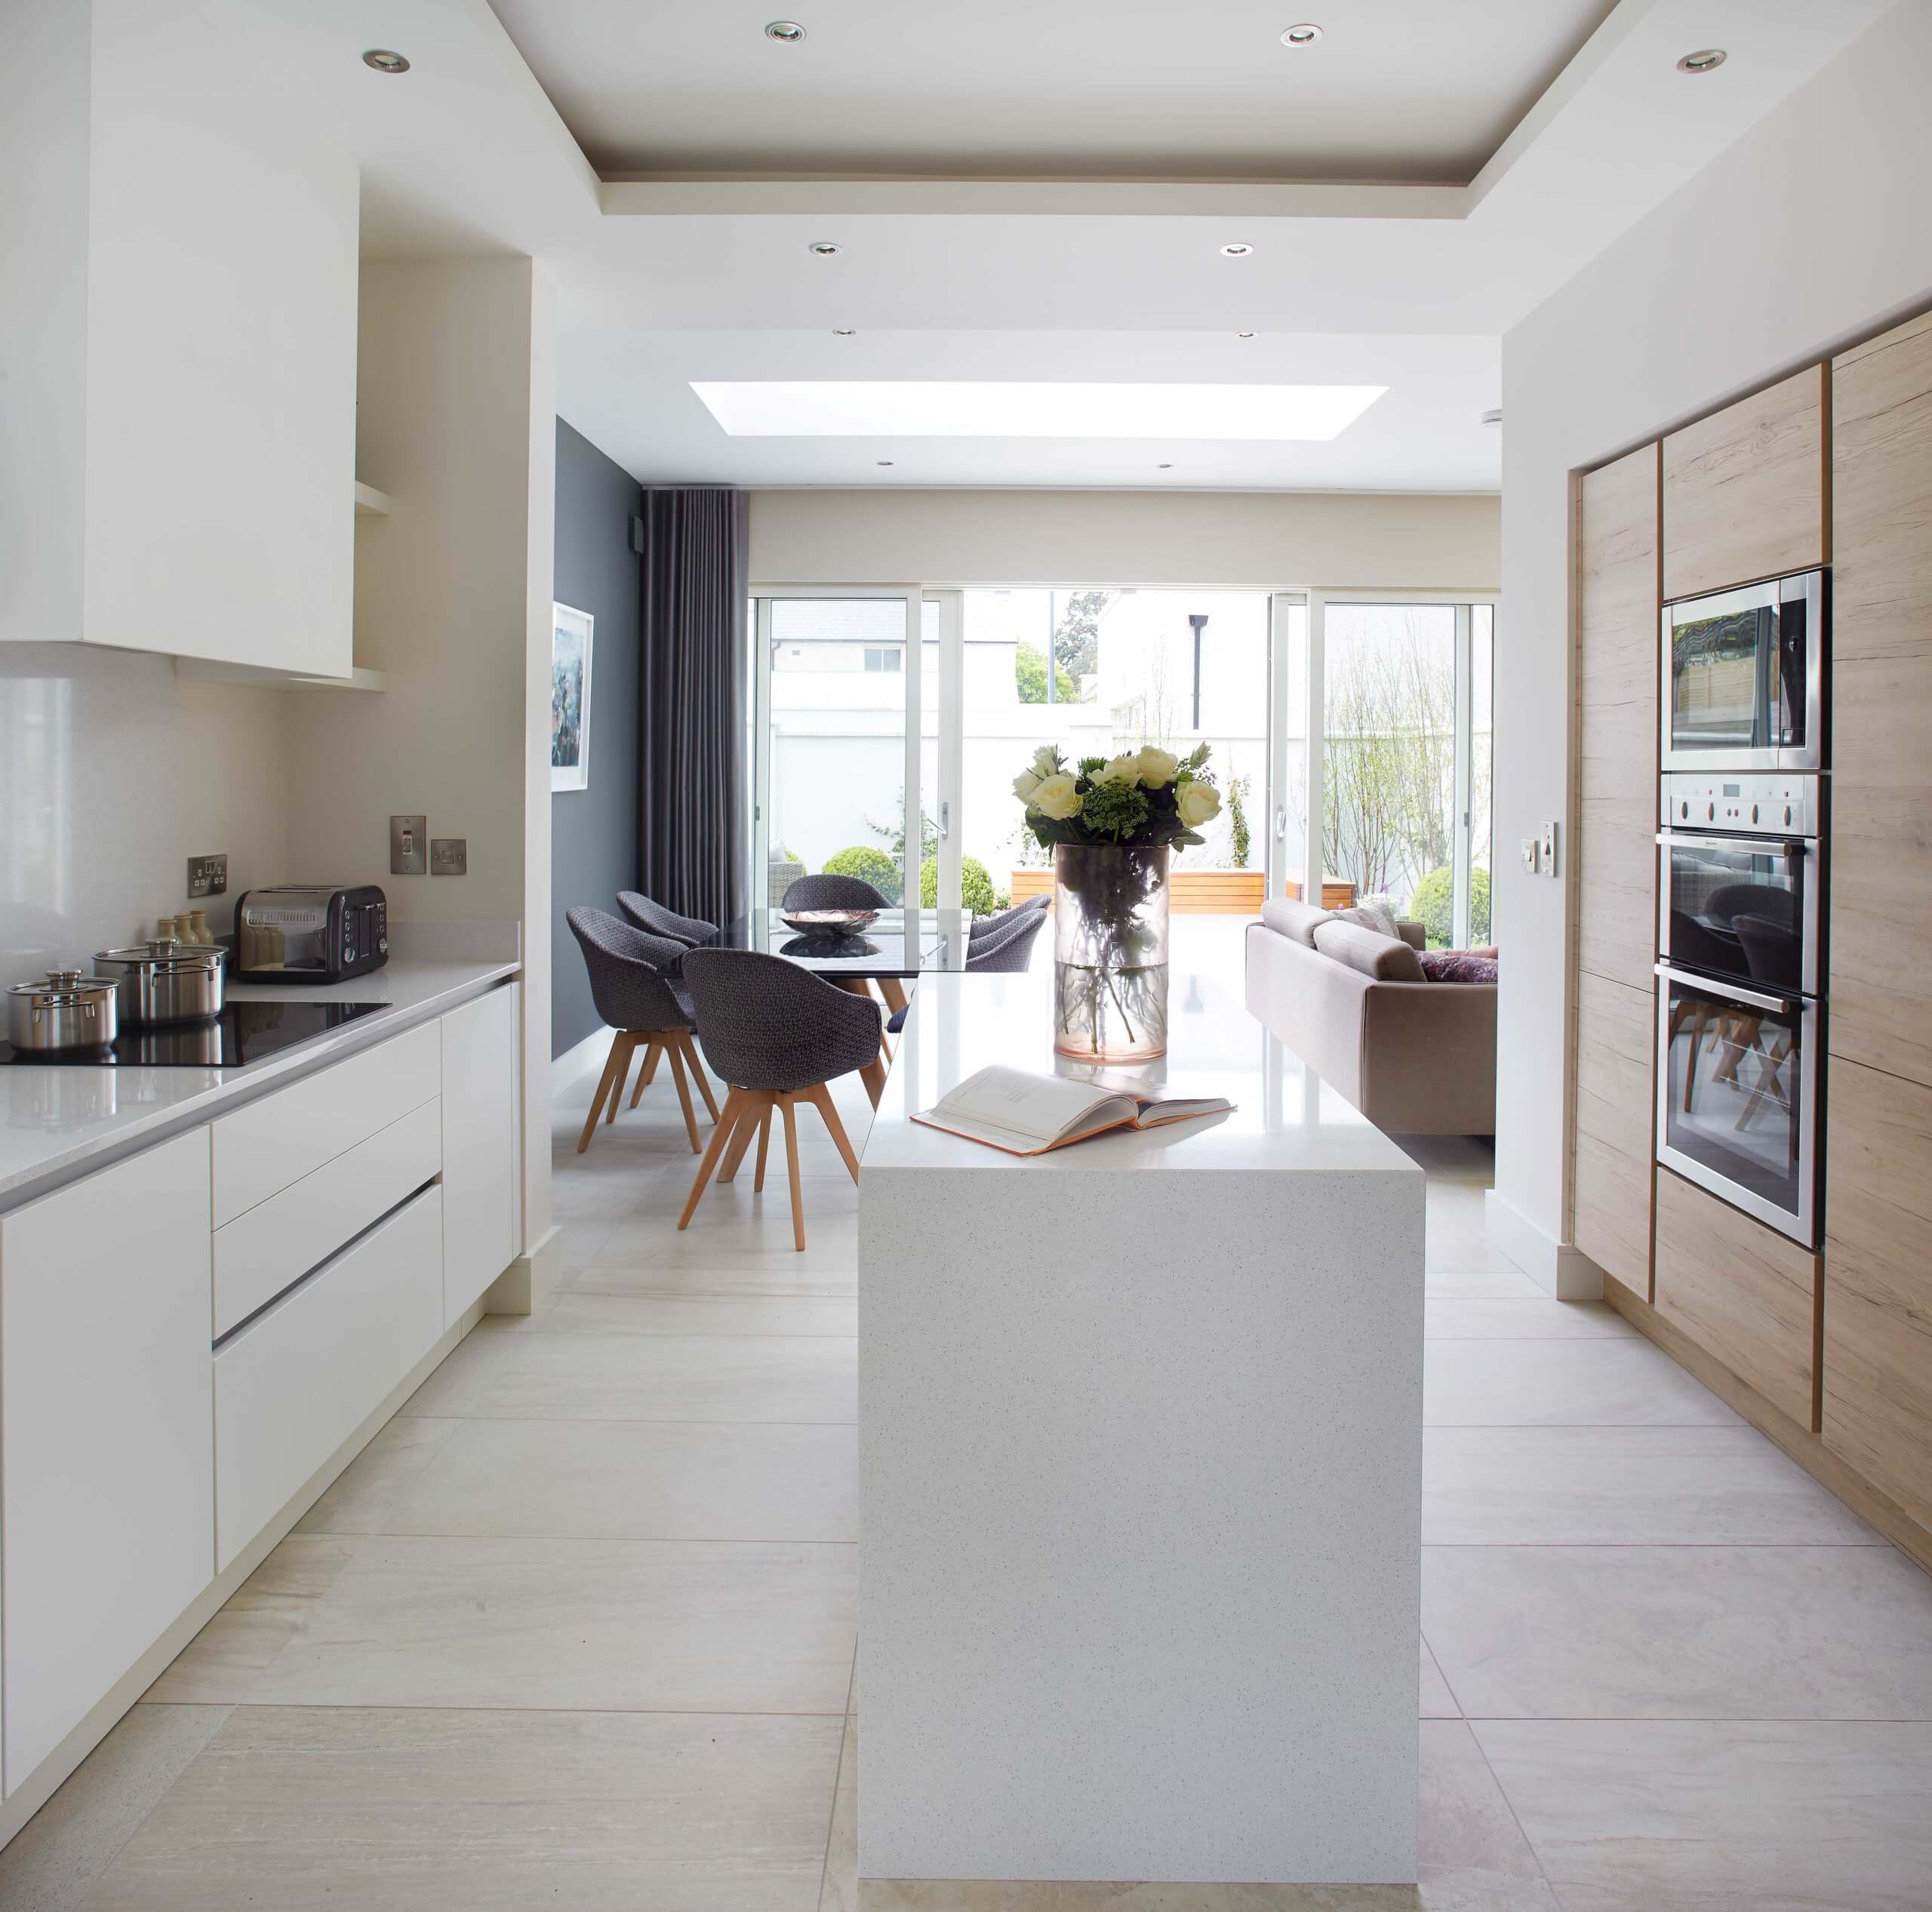 To maximise reflected light, opt for light and reflective materials or colours. Choosing lighter and brighter floor surfaces like pale timbers or floor tiles can make a significant difference. In the kitchen, go for bright countertops that enhance the overall brightness.